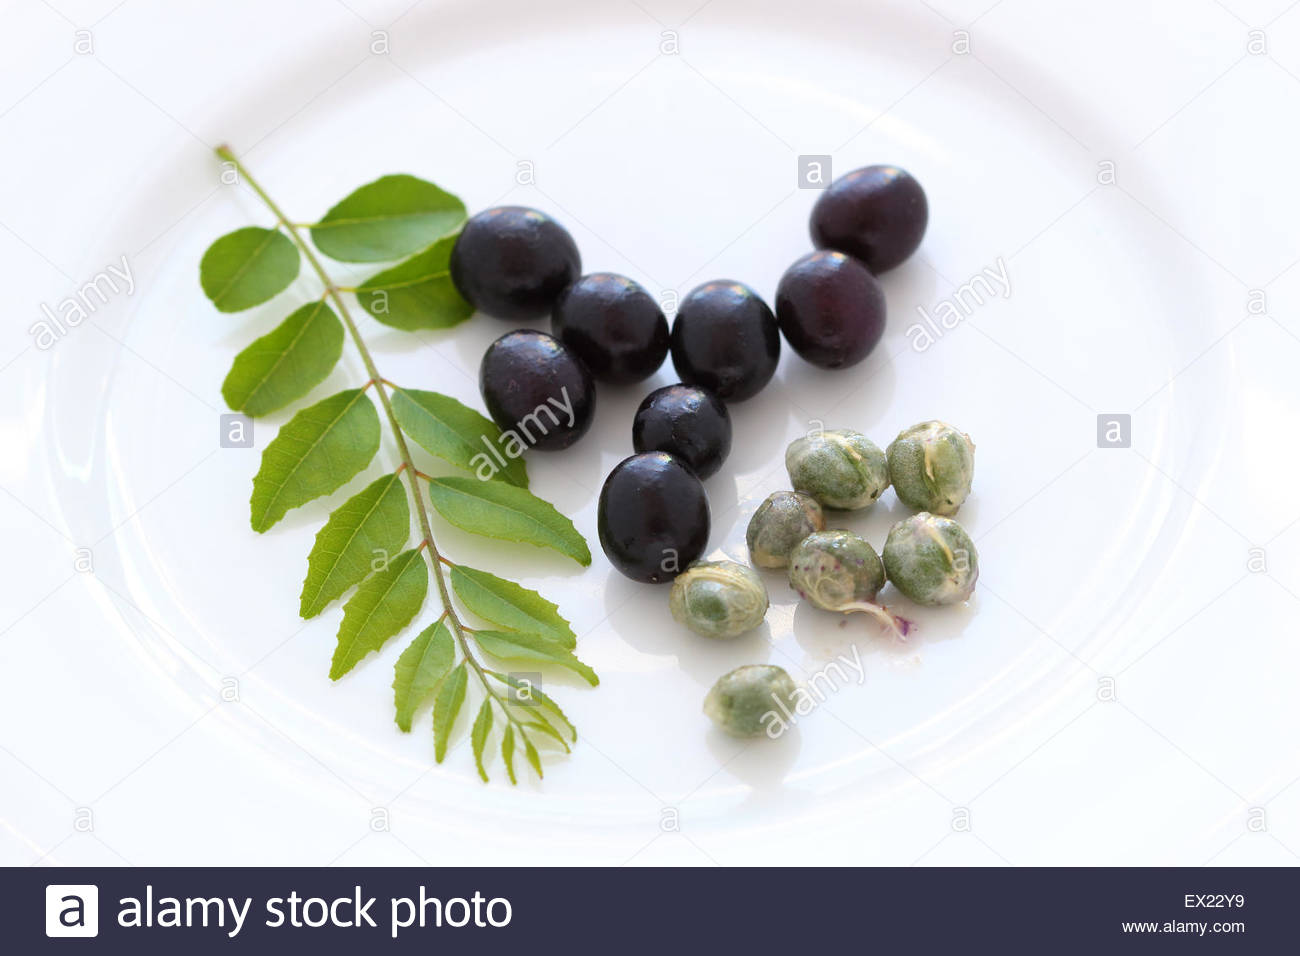 curry-leaves-or-known-as-murraya-koenigii-with-seeds-on-white-plate-EX22Y9.jpg